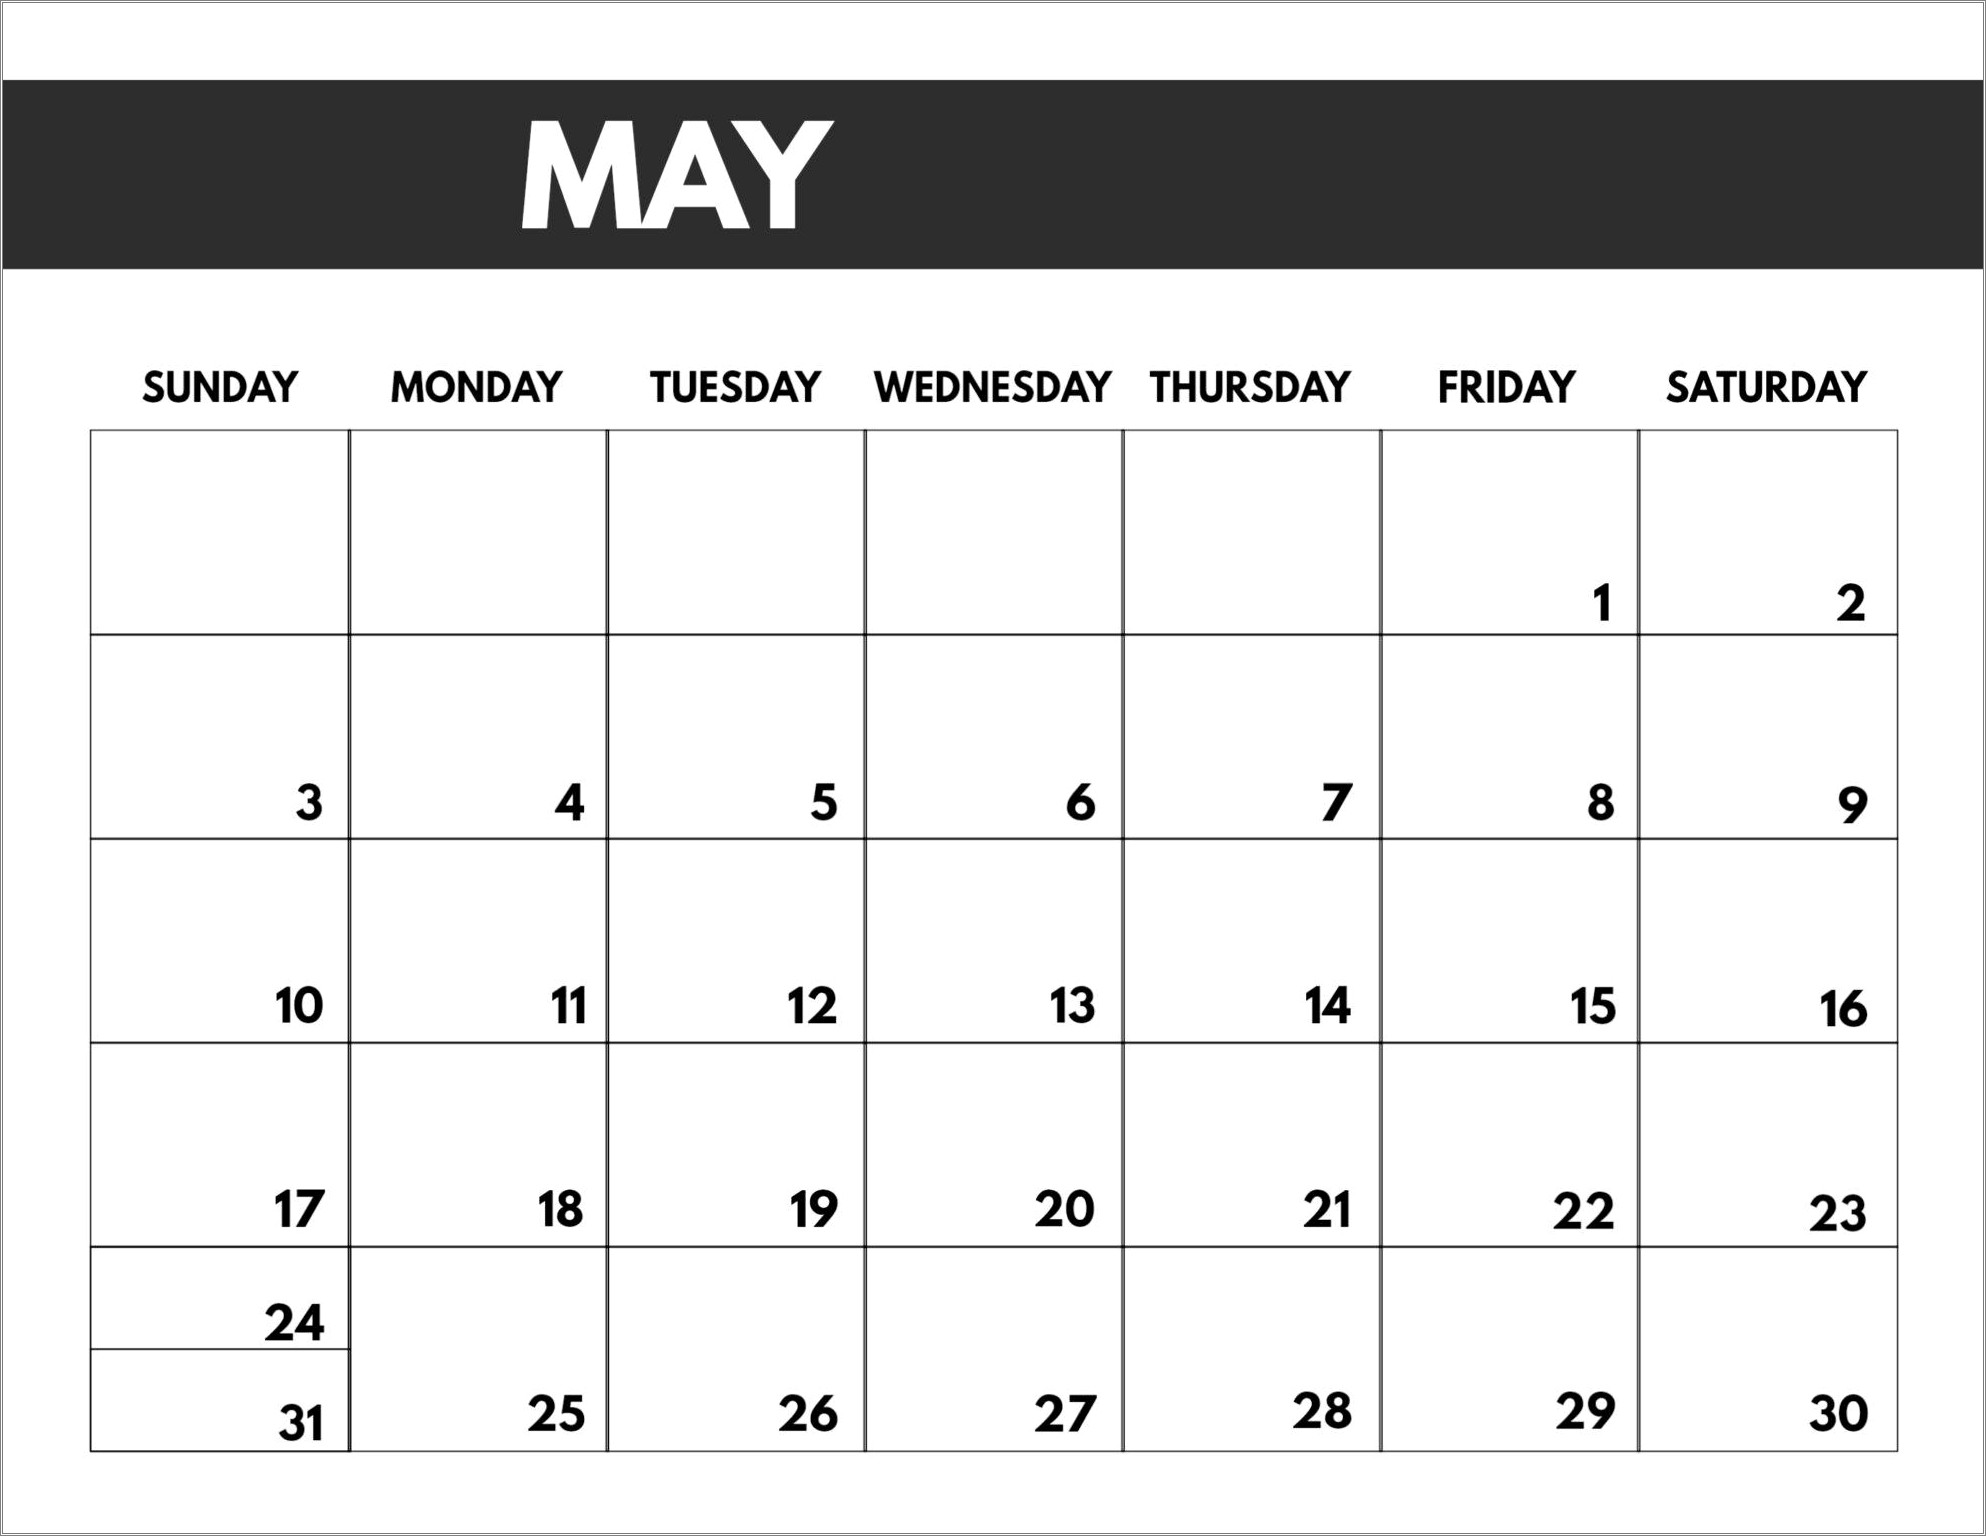 Free Blank Fre Calendar Templates For May 2020